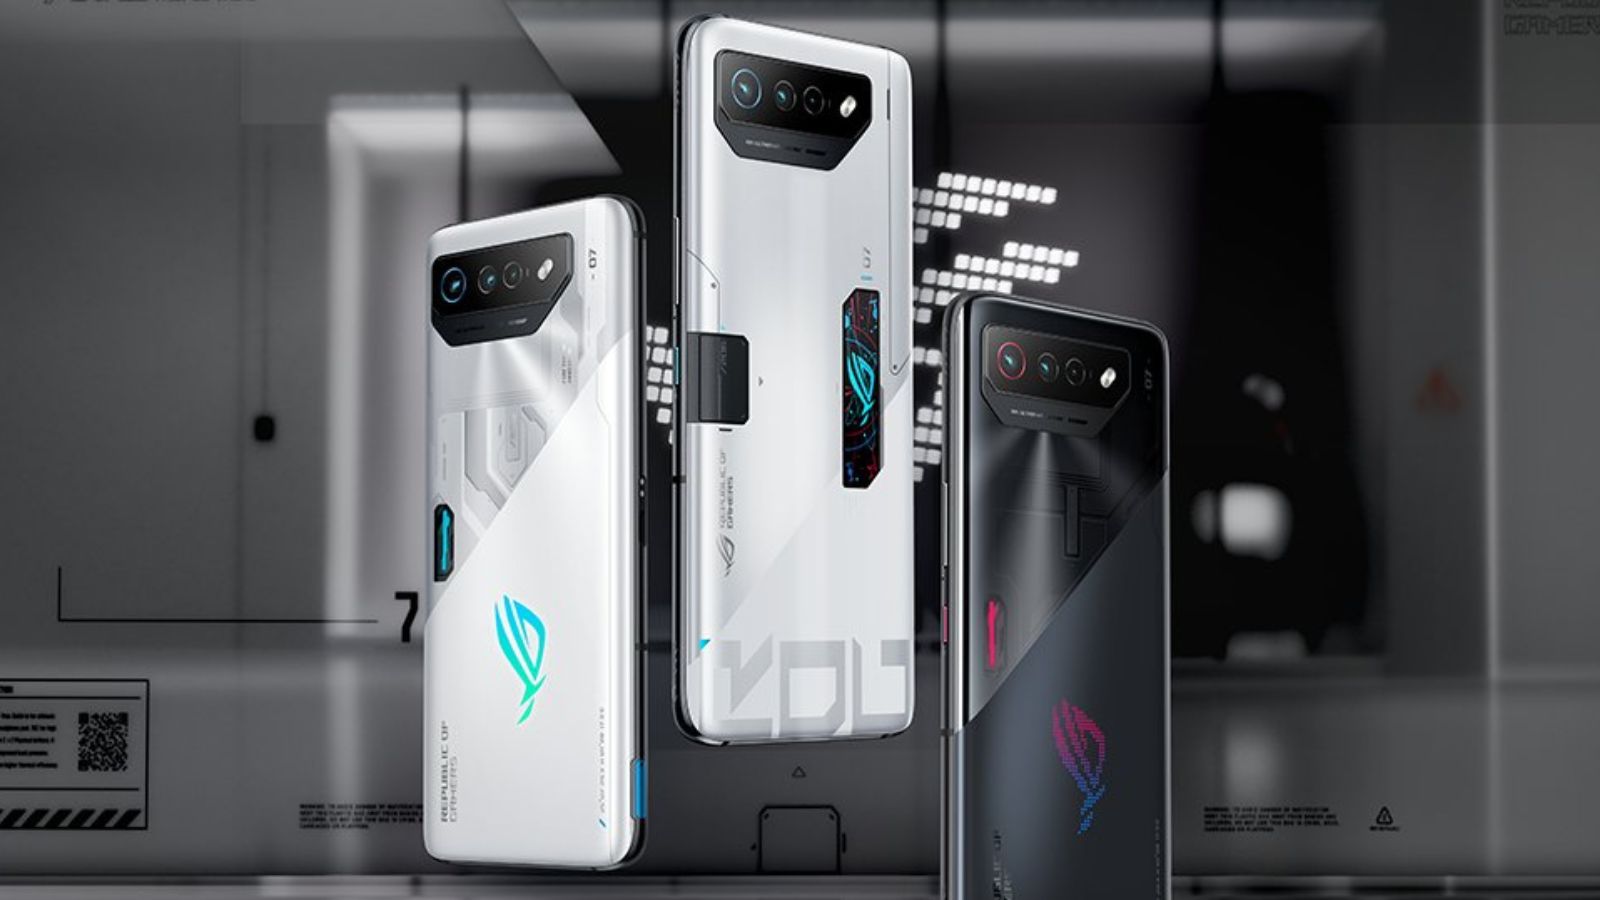 The Asus ROG Phone ludicrously - 7 company\'s latest fast is Dexerto the gaming phone